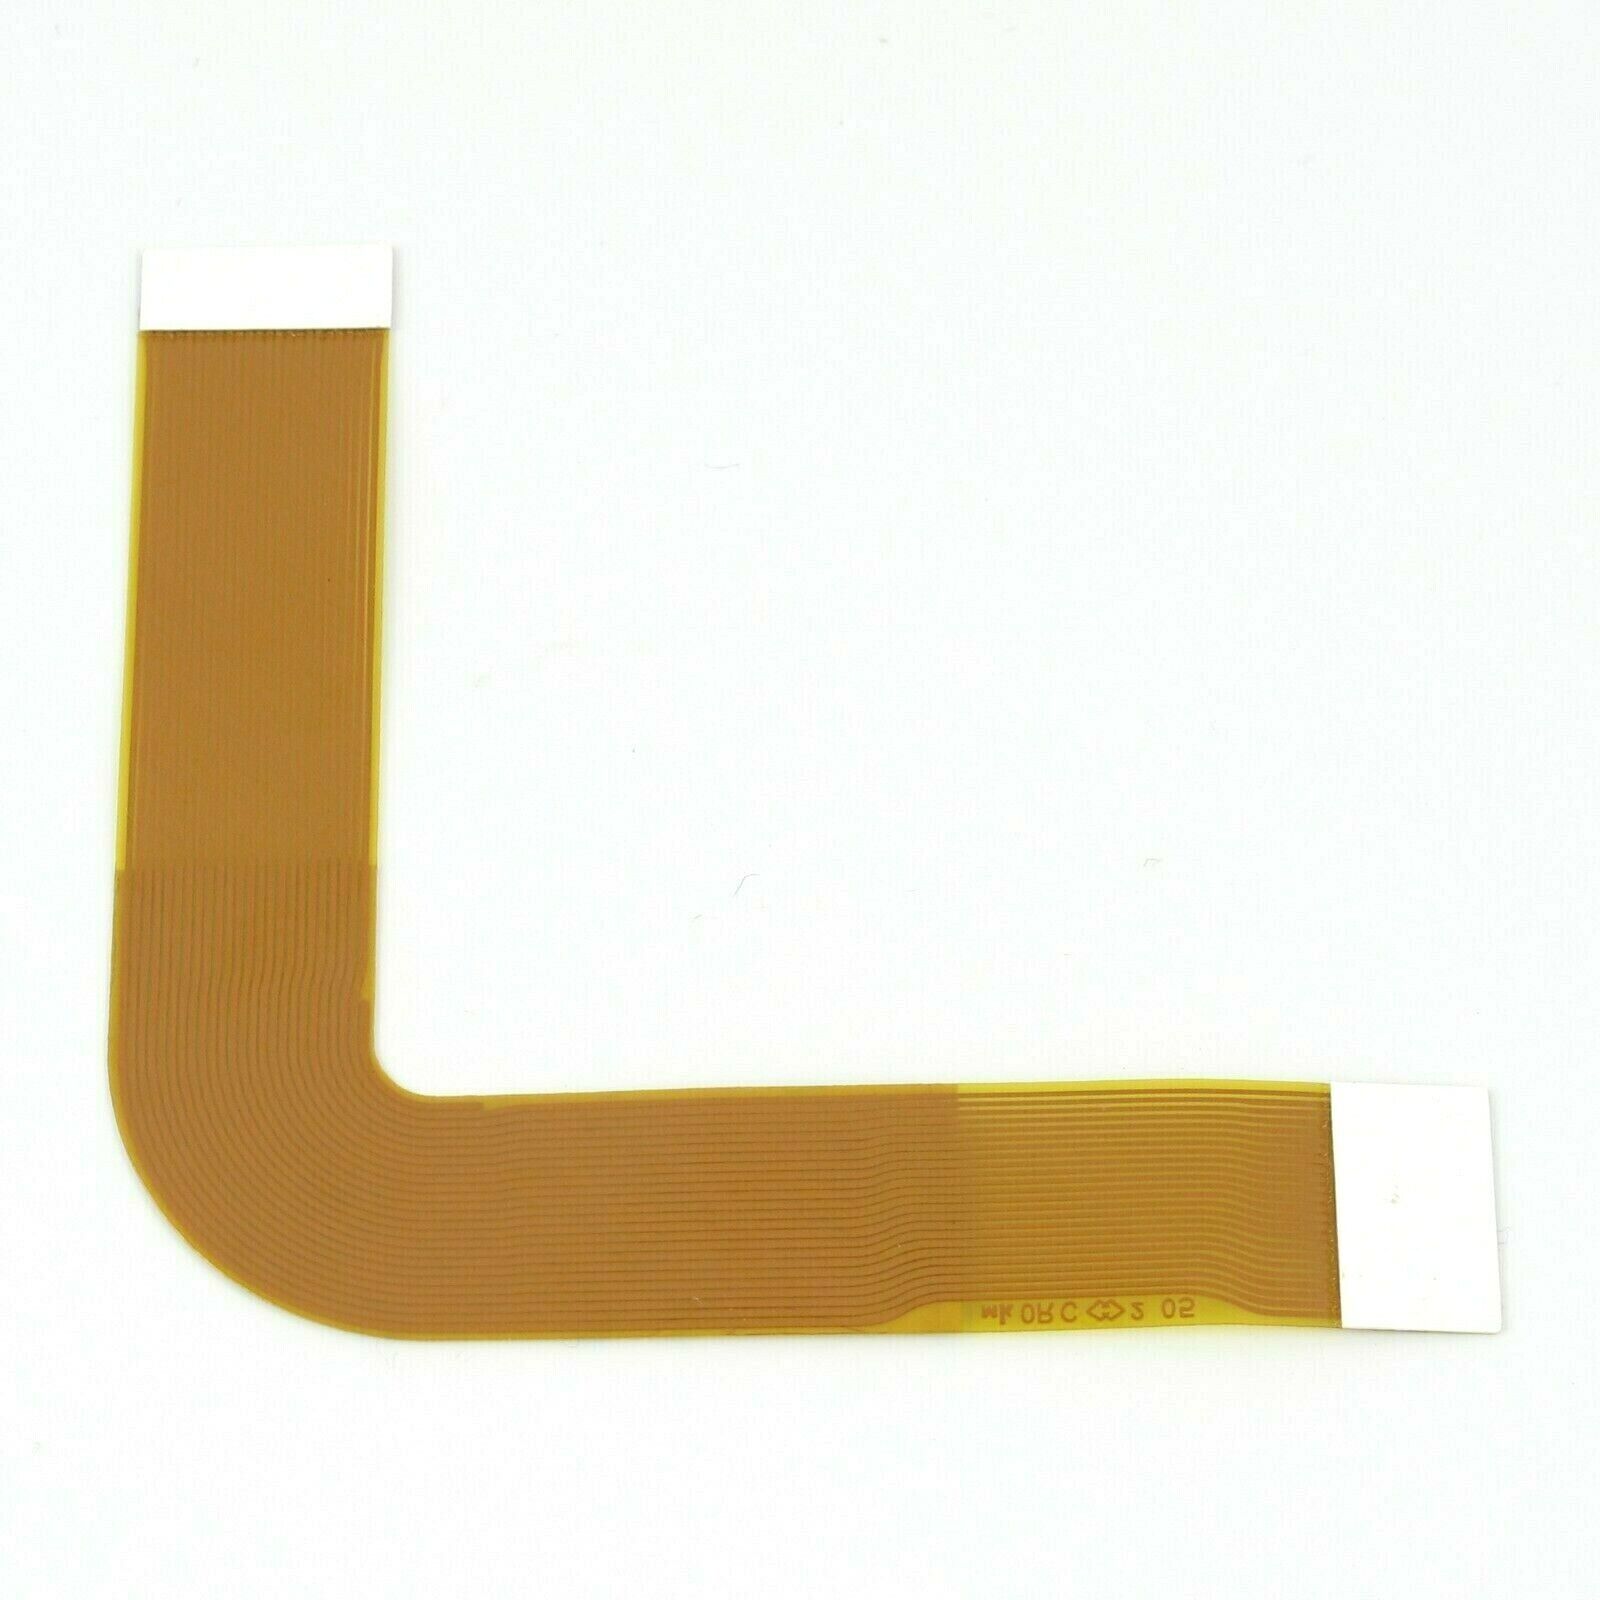 5 x Laser Flex Cable Ribbon for PS2 Slim SCPH70011 SCPH70012 SCPH77001 Unbranded/Generic 70000X - фотография #4